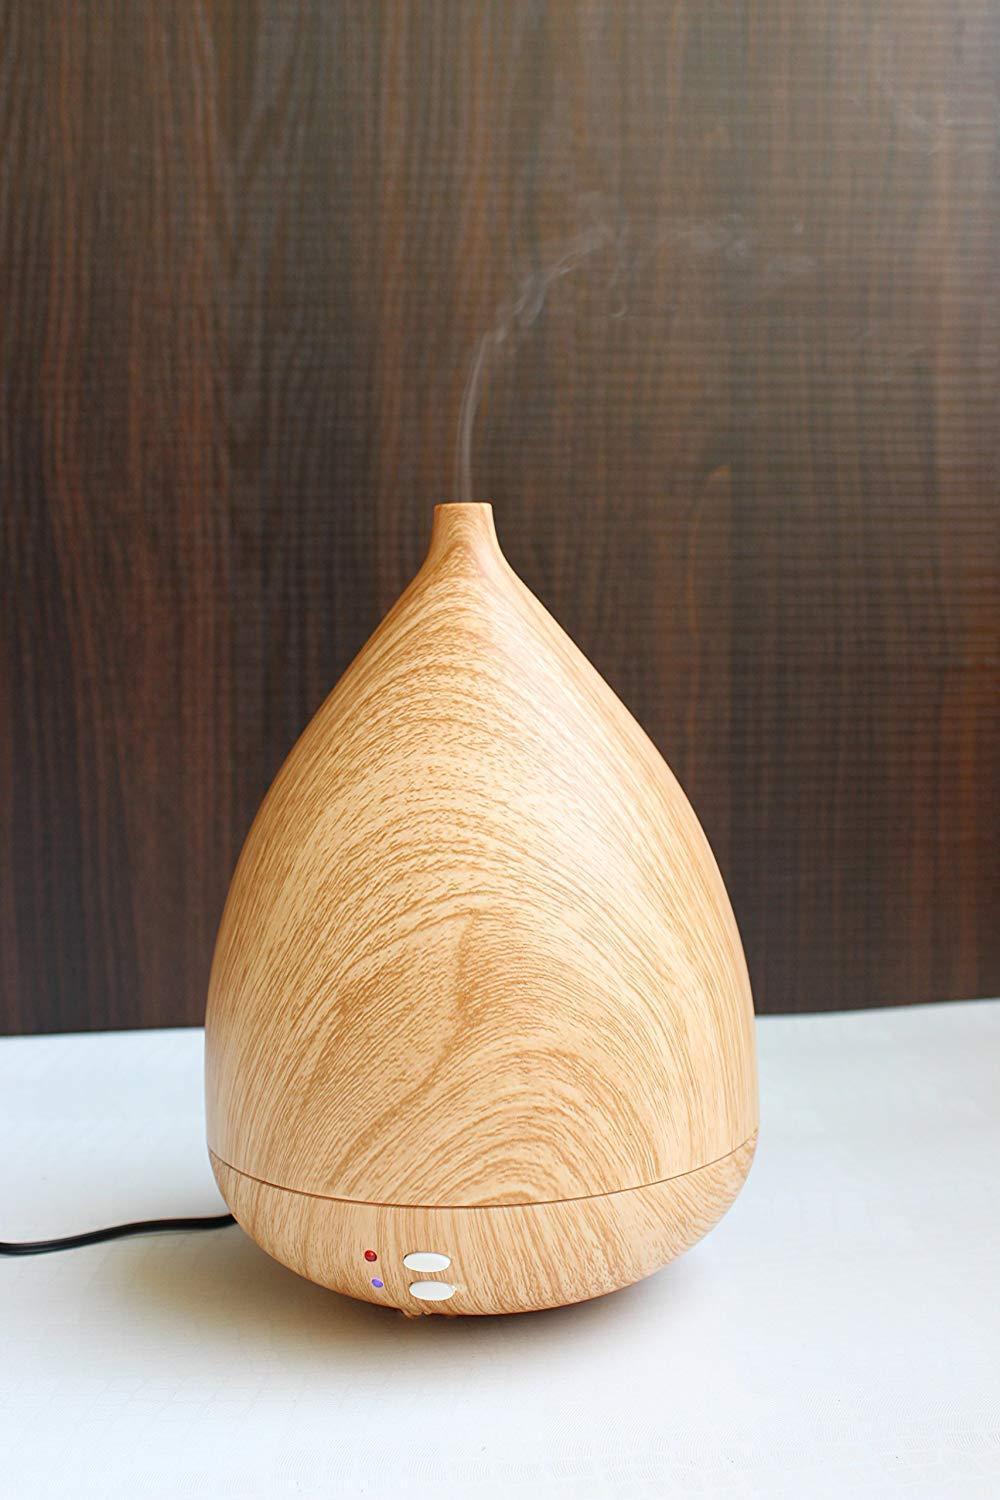 FunkyTradition 300ml Big Ultrasonic Essential Oil Aroma Diffuser, Bamboo Finish, BPA Free, Cool Mist Humidifier for Office Home Bedroom Living Room Study Yoga Spa - FunkyTradition